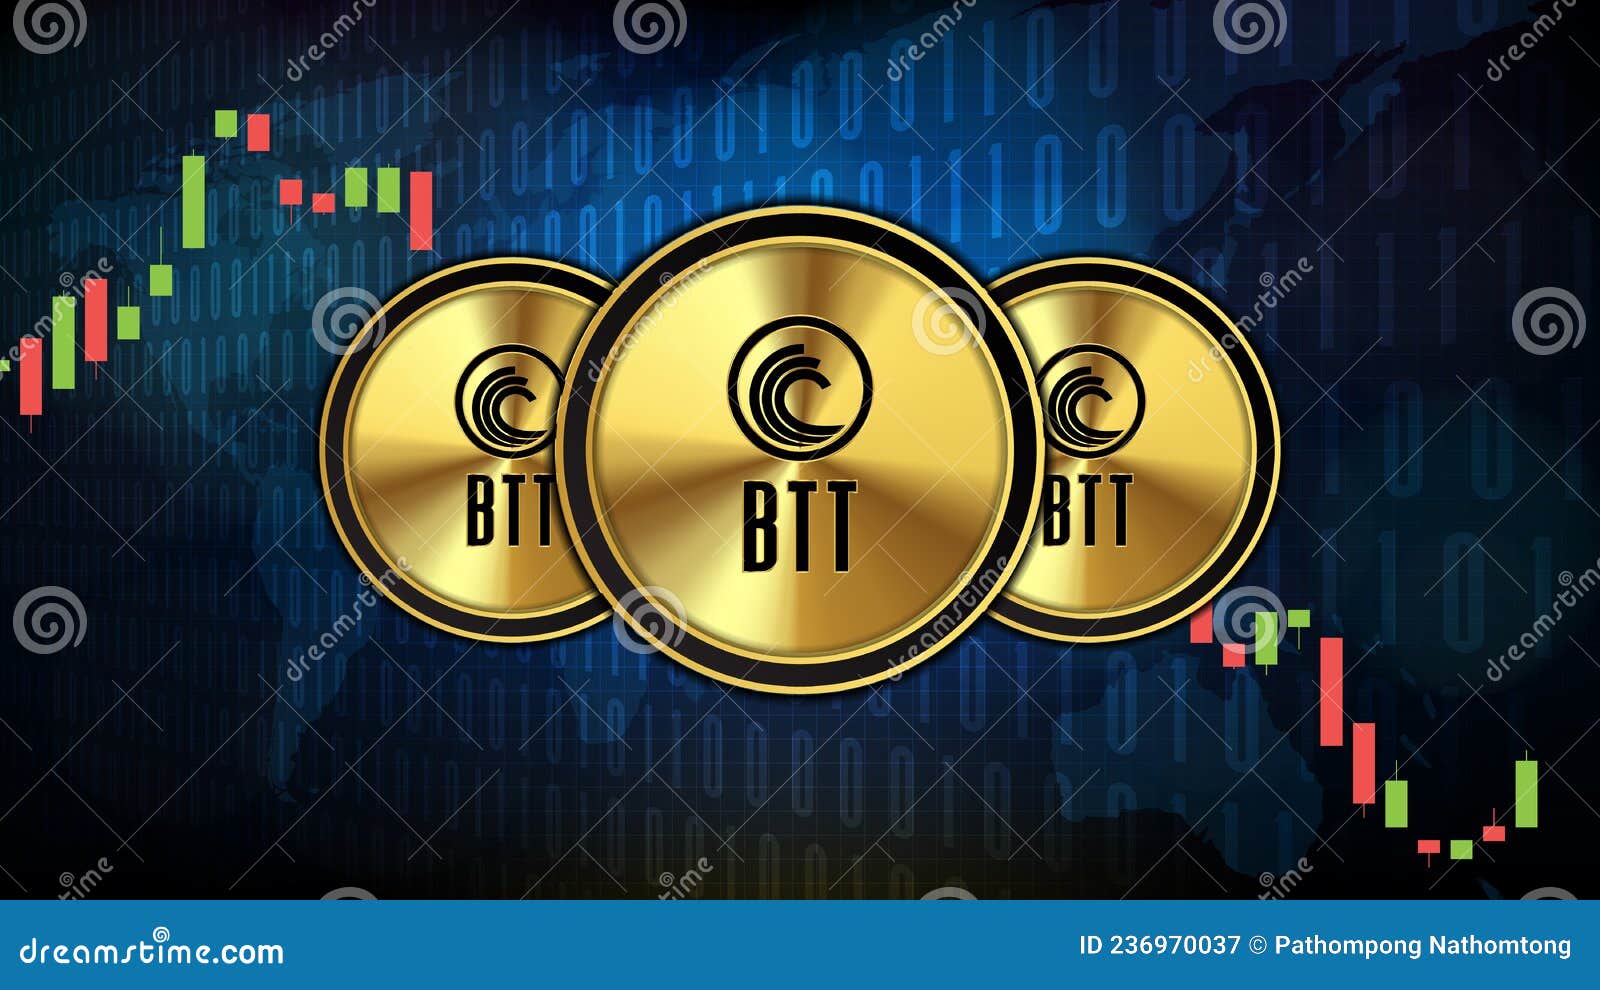 futuristic technology background of bittorrent btt price graph chart coin digital cryptocurrency